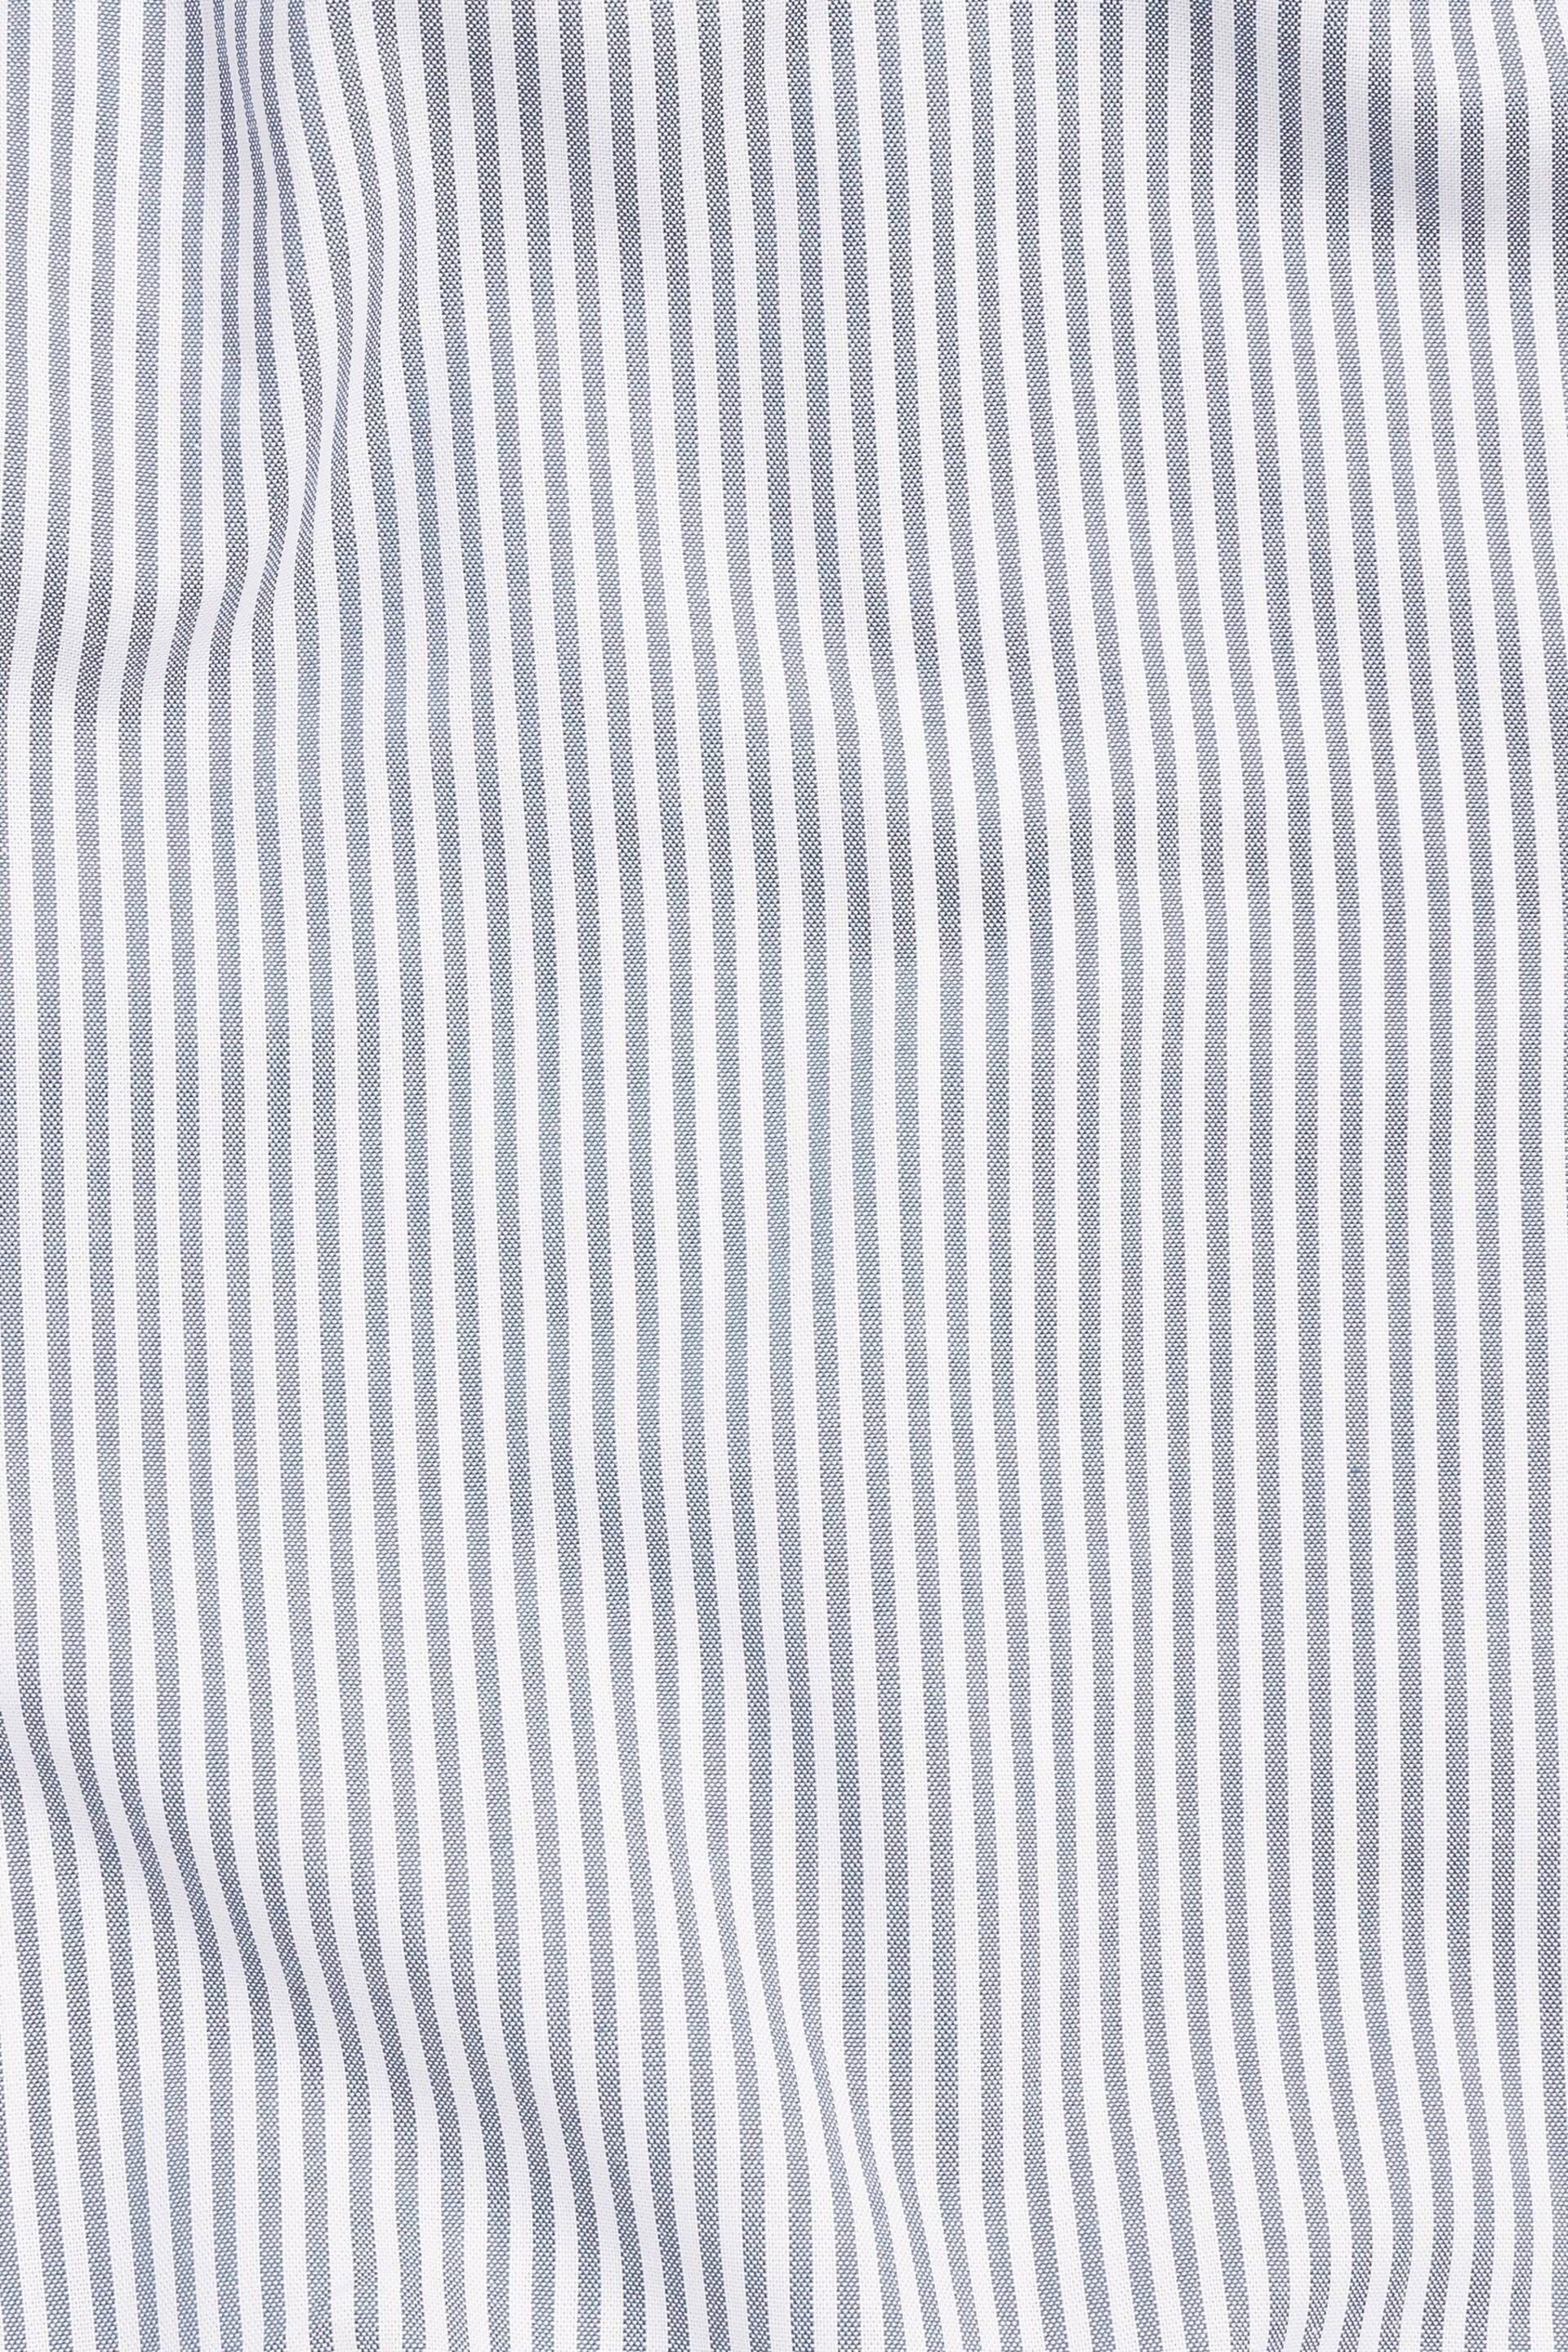 White/Blue Stripe Regular Fit Easy Iron Button Down Oxford Shirt - Image 8 of 9